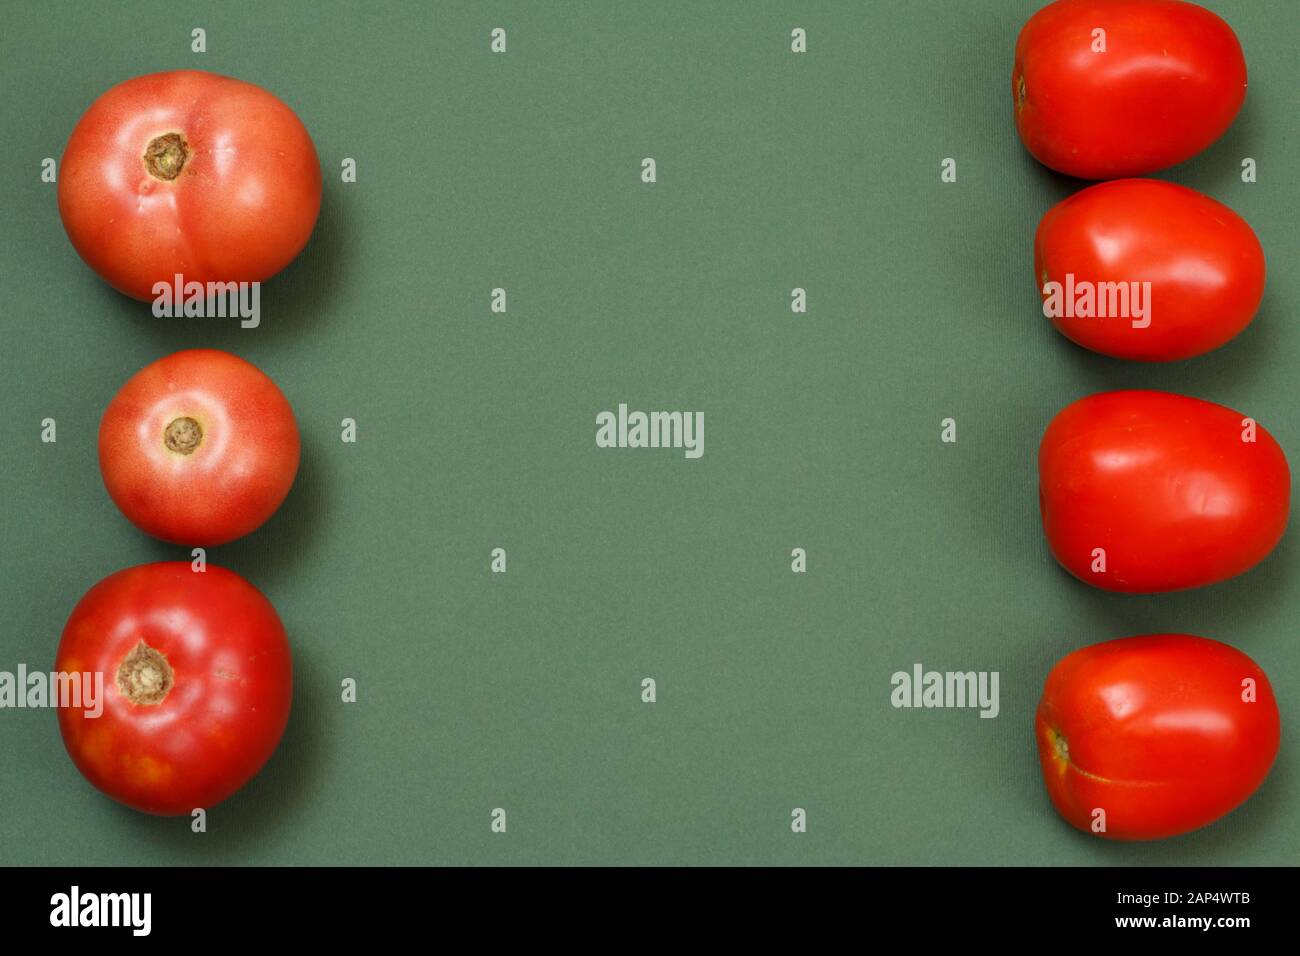 Top view of fresh tomatoes on green background. Vegetables on kitchen table. Top view. Stock Photo